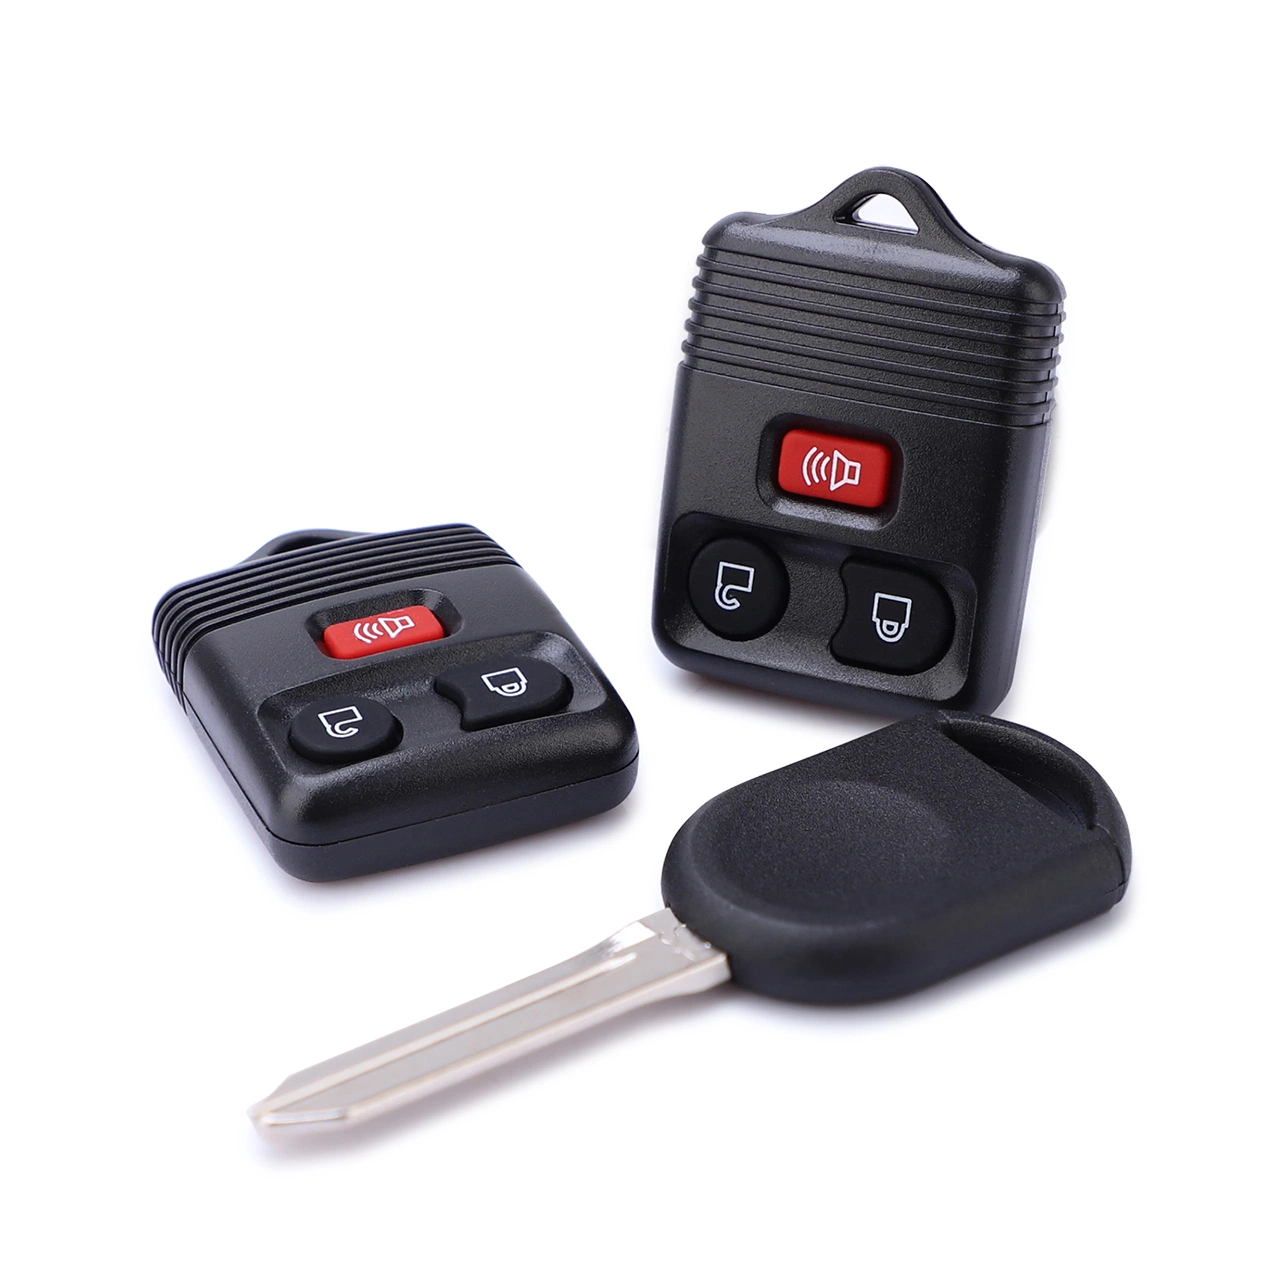 Long Range Wholesale Wireless RF Lora Receiver Switch Remote Control for Roller Shutter/ Electric Gate/Car